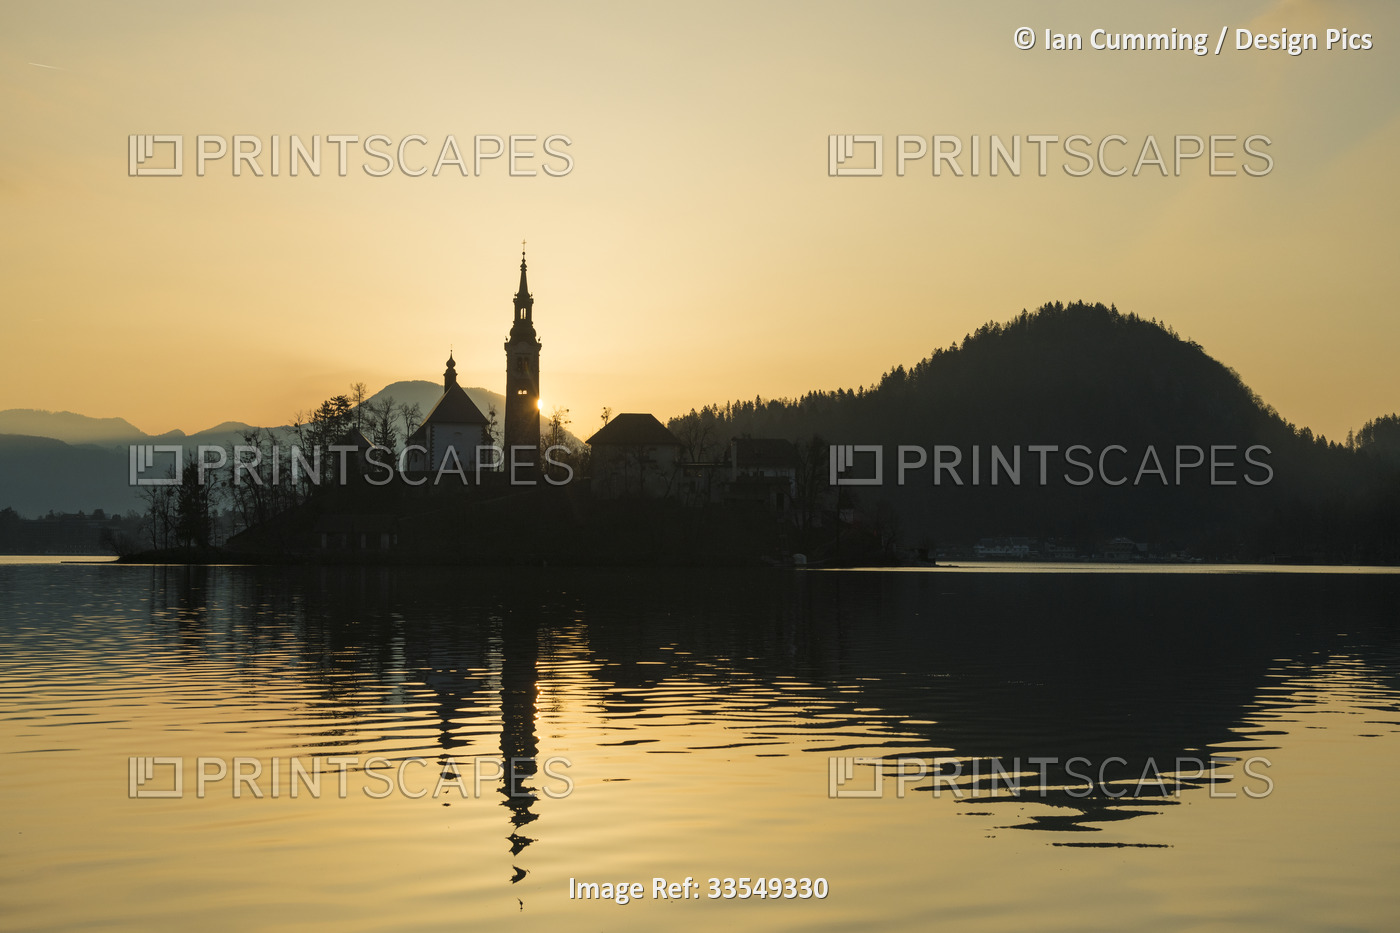 Silhouette of church and other buildings on Lake Bled at dawn; Bled, Slovenia